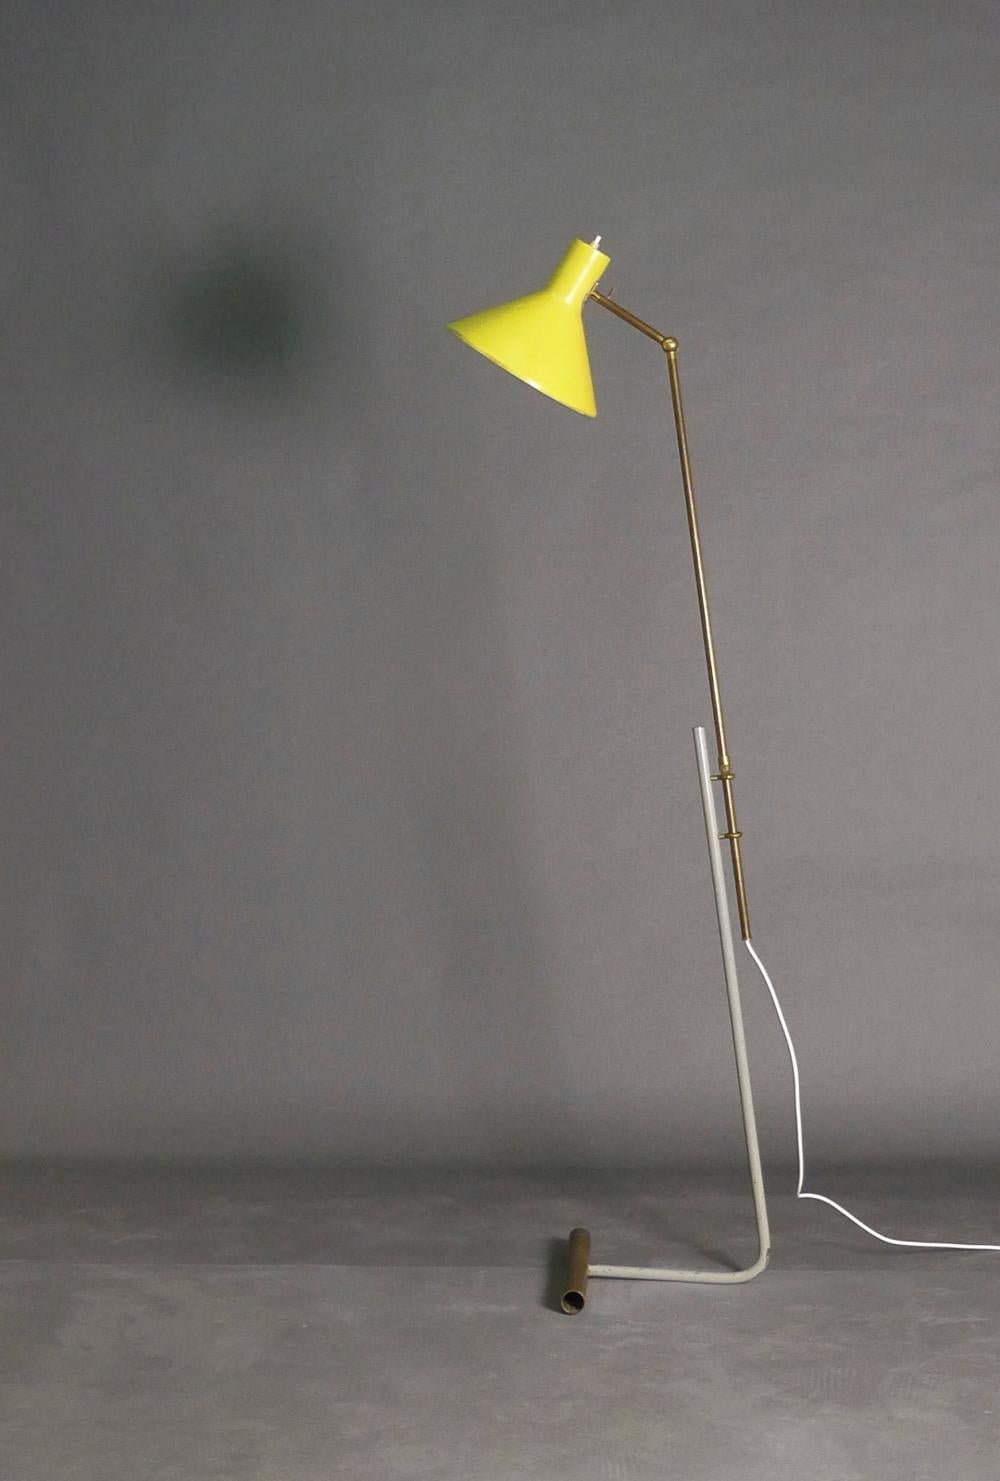 Gino Sarfatti, Floor Light, model 1045 for Arteluce, Italy.

Designed in 1948, this example is likely to have been one of the first production run, as it has a brass upper stem (later versions were chrome plated) and open brass foot. The lamp has an